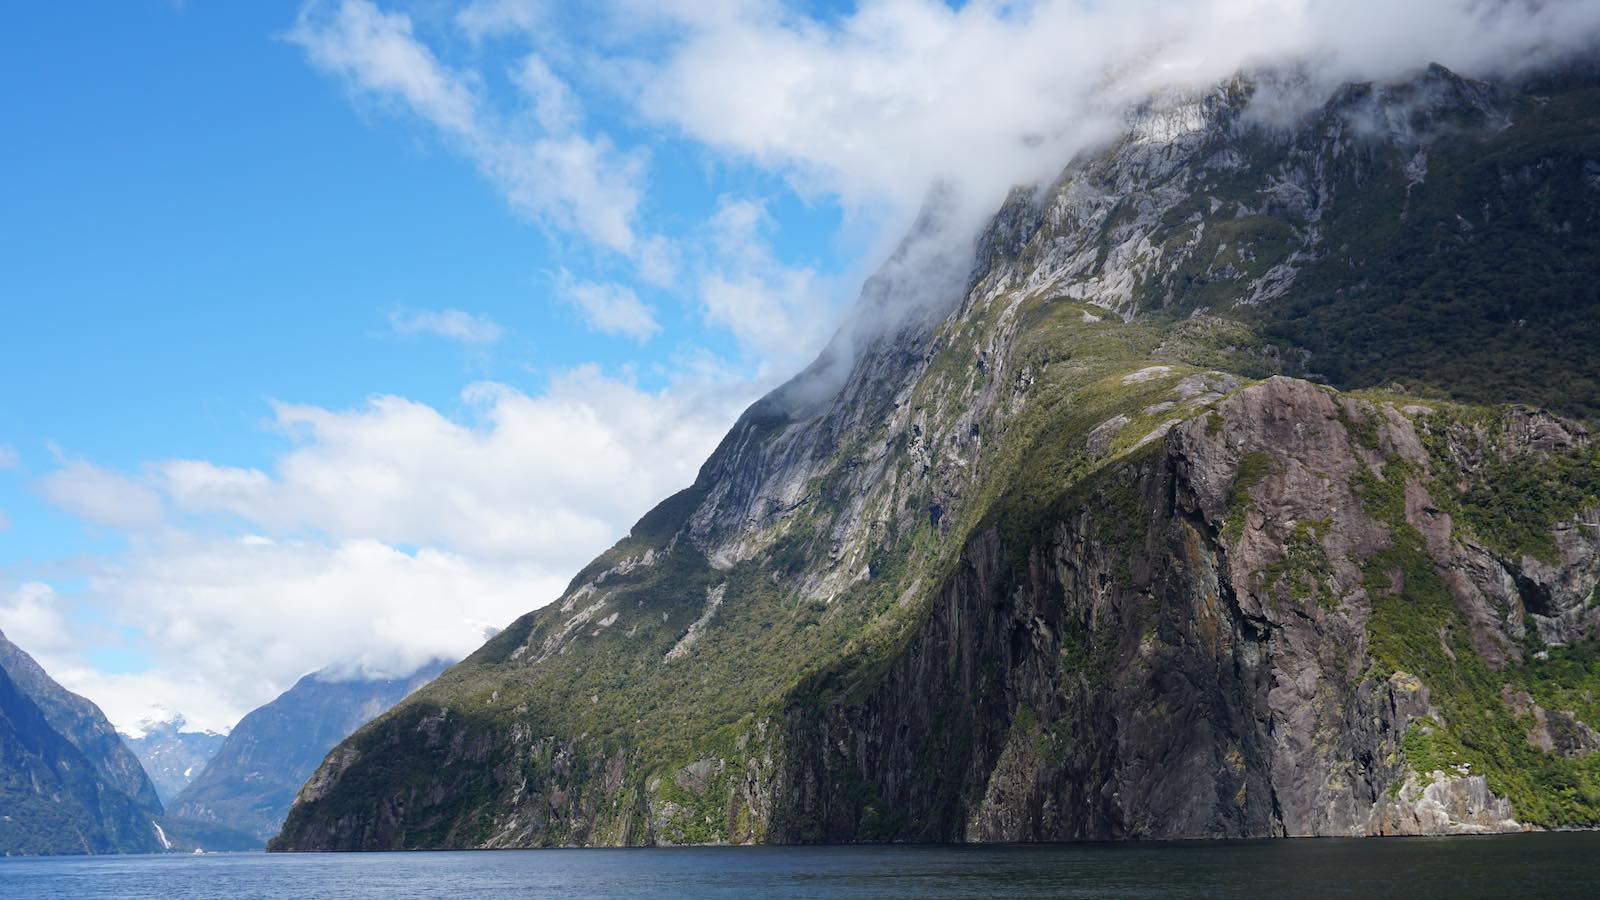 One of the countless glacier carved mountains that make up Milford Sound